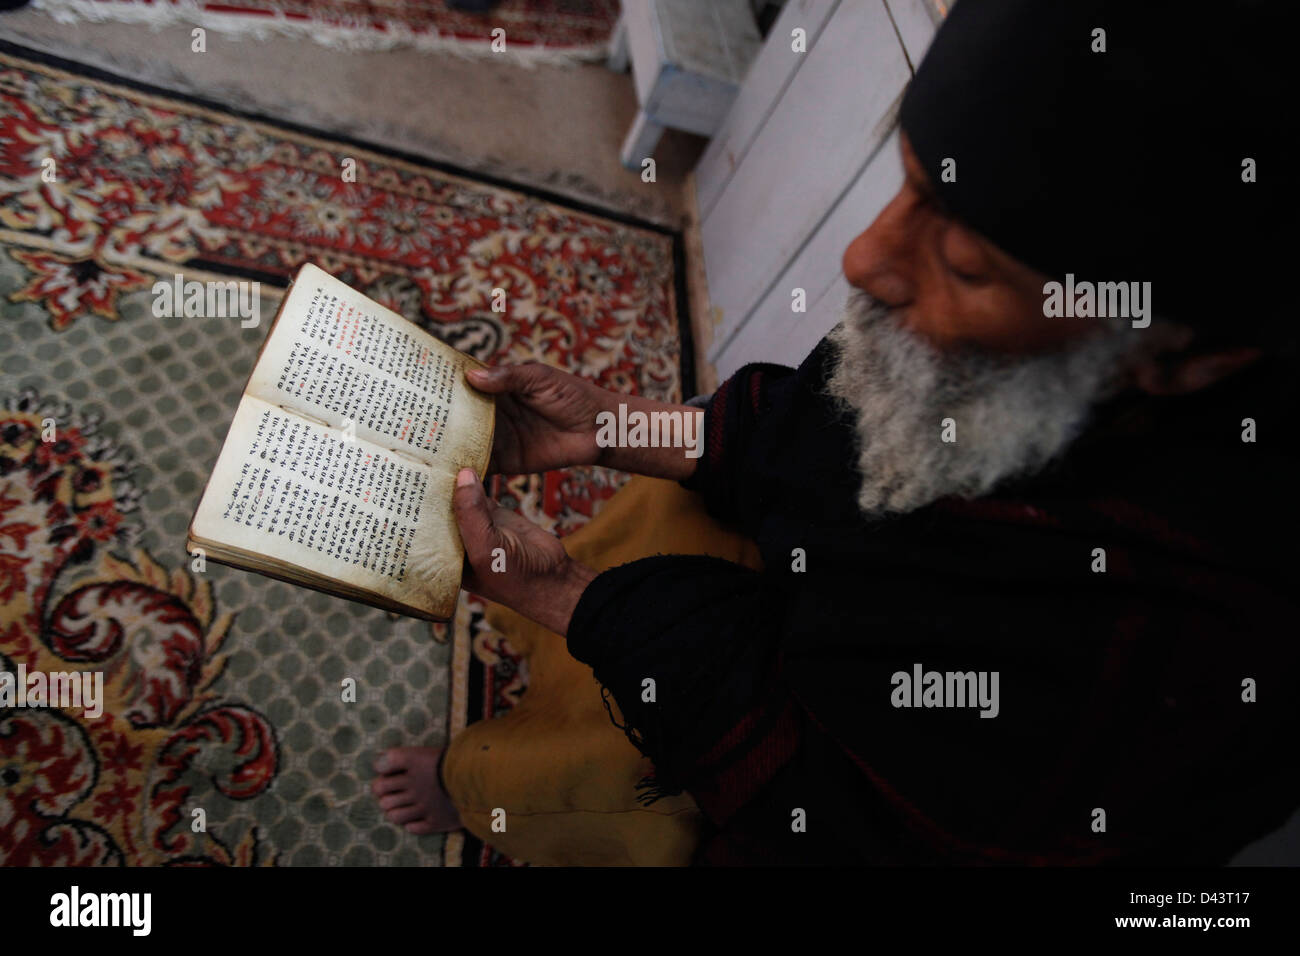 An Ethiopian orthodox monk reading the bible in Amharic Stock Photo